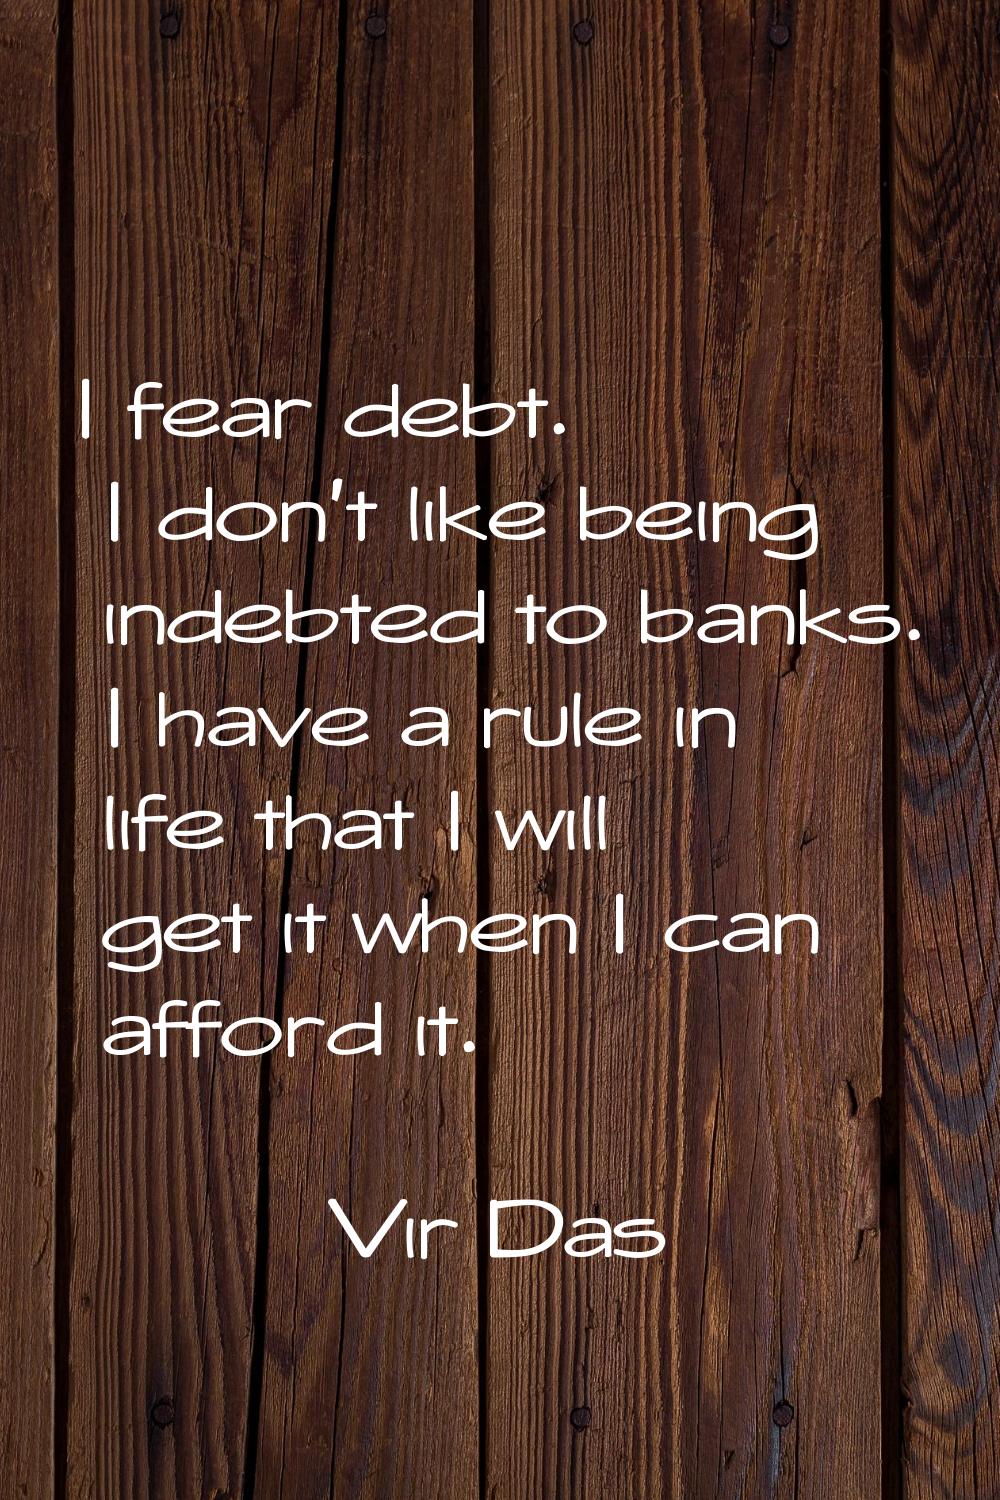 I fear debt. I don't like being indebted to banks. I have a rule in life that I will get it when I 